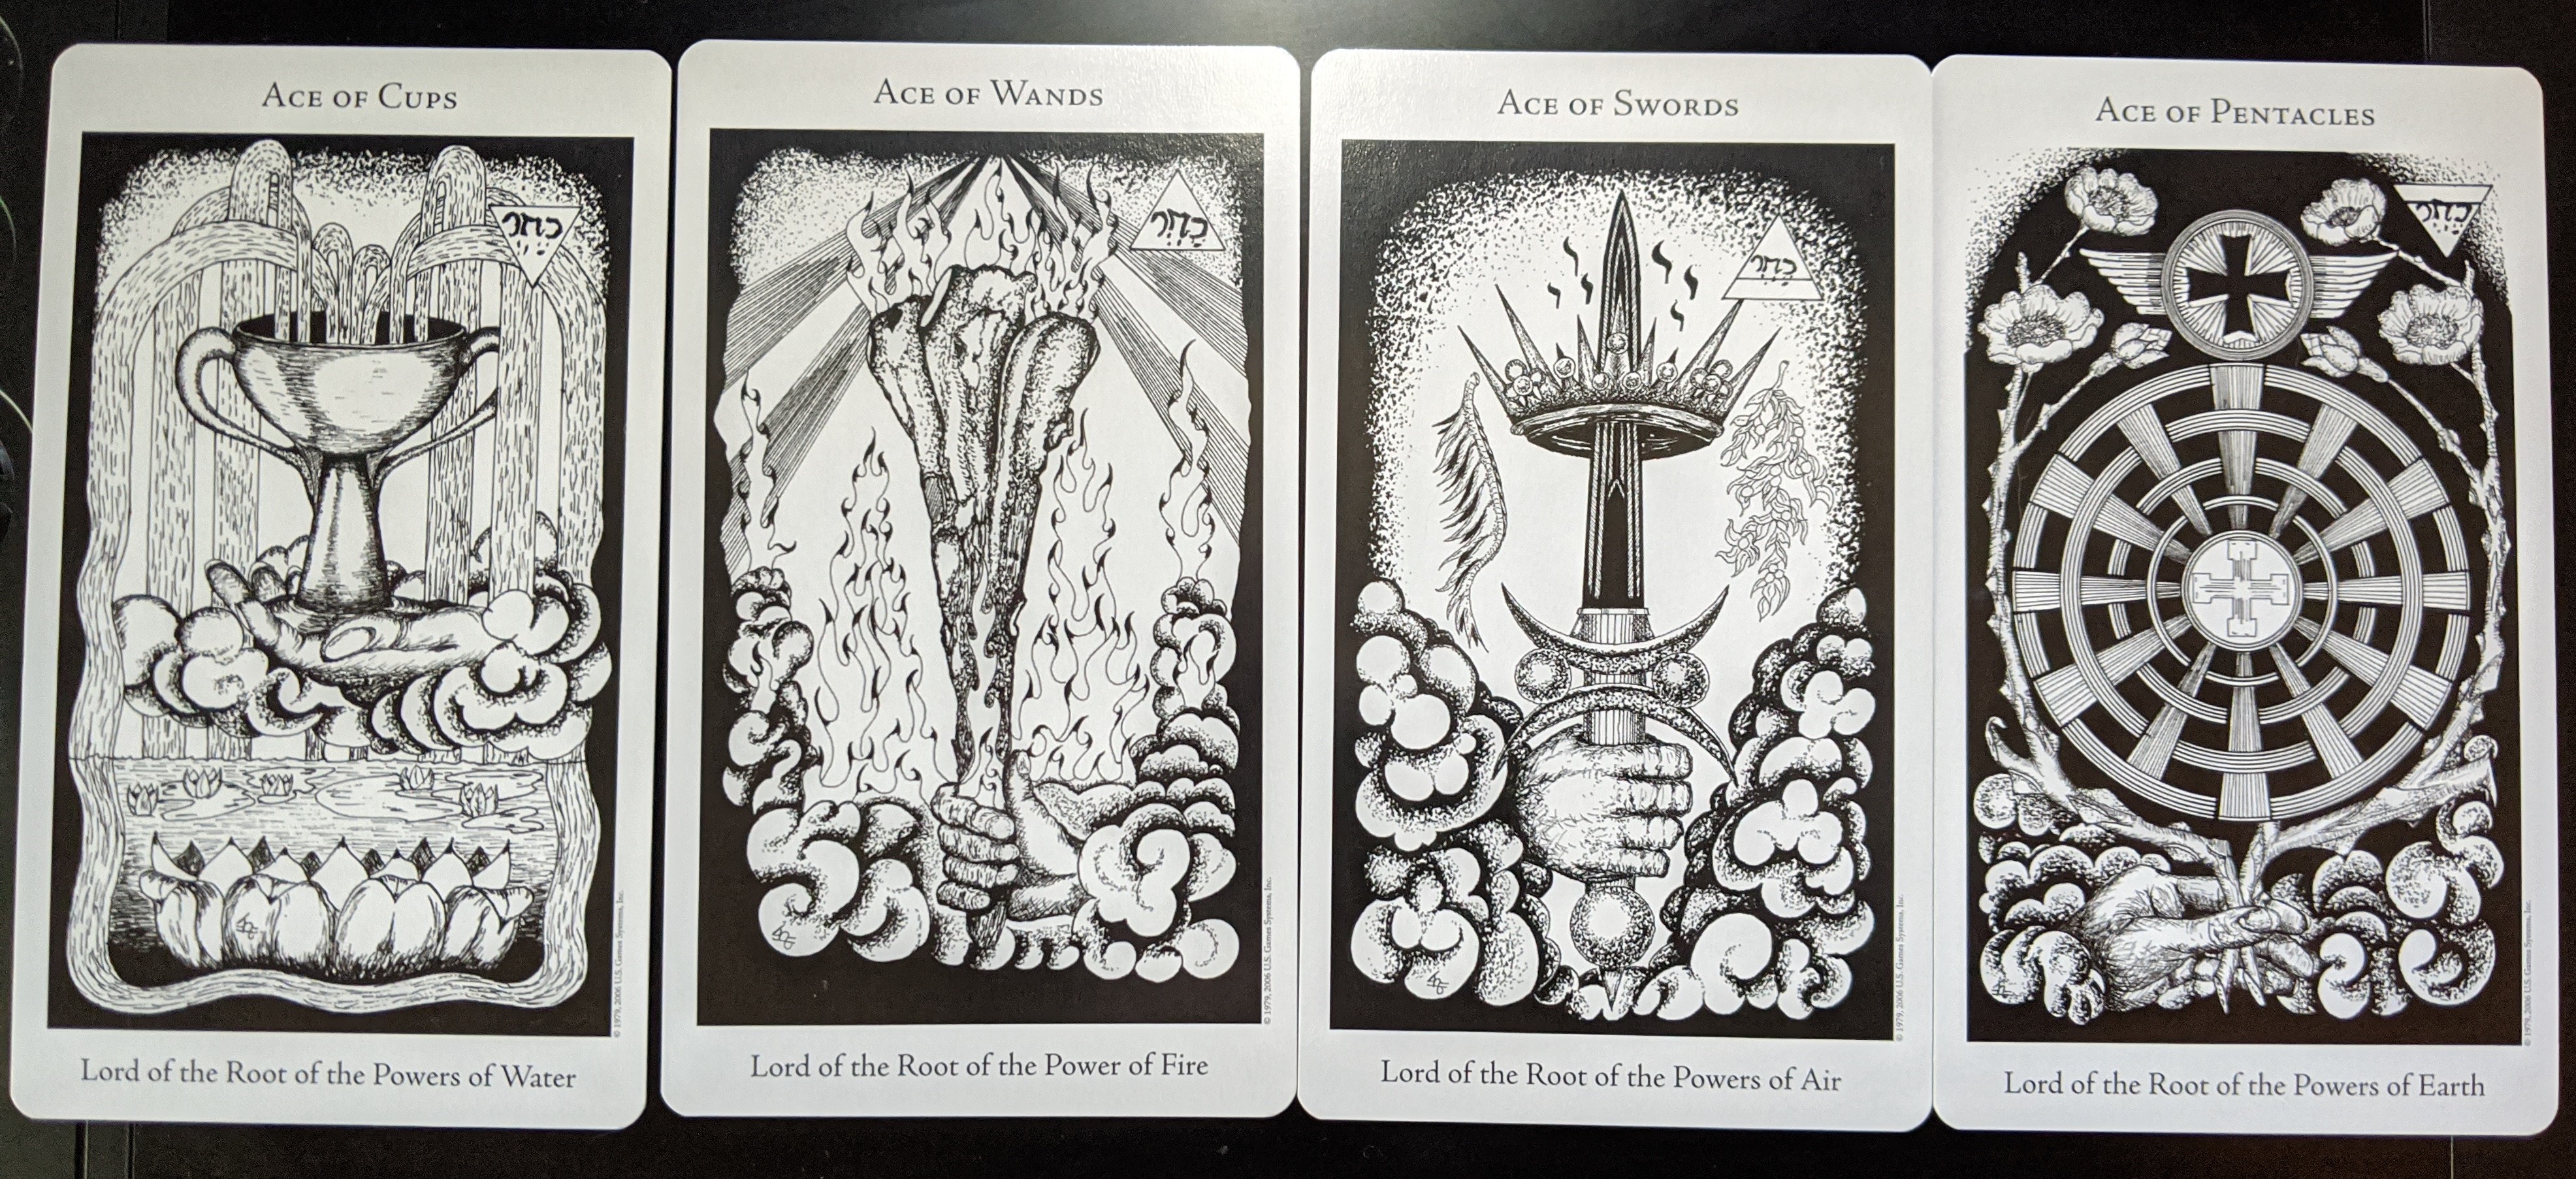 [Pictured: The Ace of Cups, the Ace of Wands, the Ace of Swords, and the Ace of Pentacles from the Hermetic Tarot.]